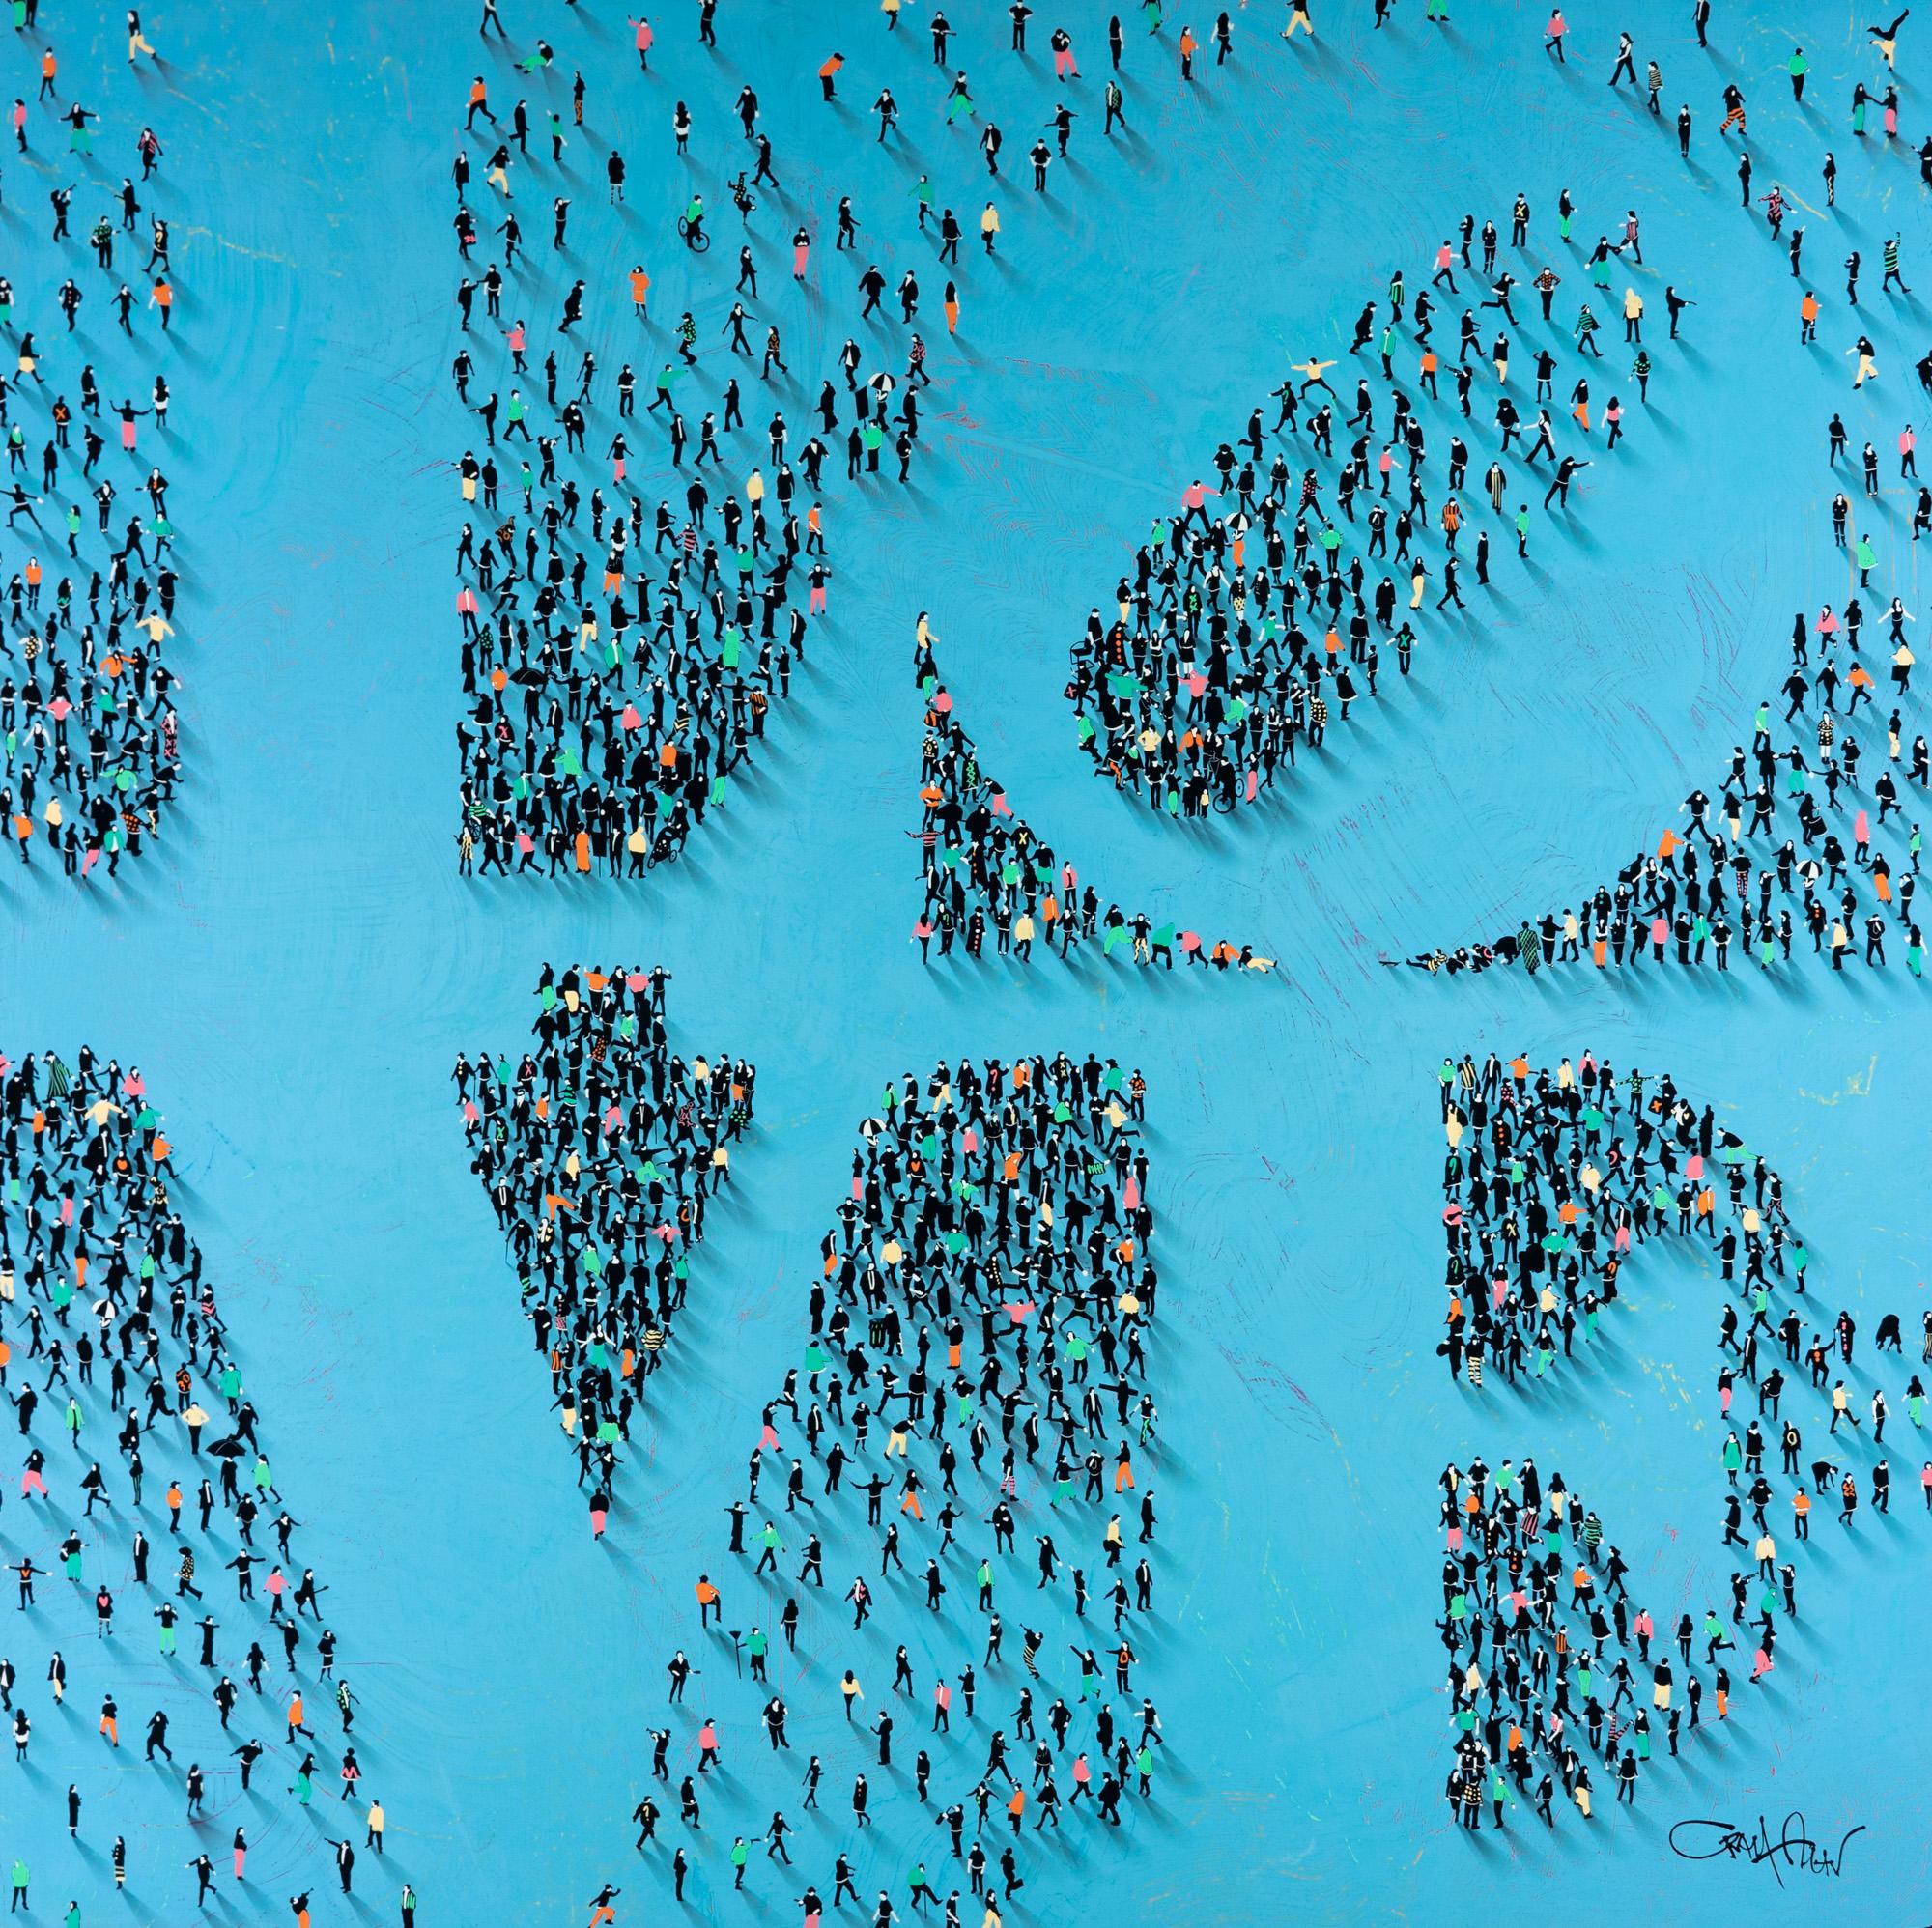 "Populus: Everyone" Crowd of Figures Spelling Love Giclee on Canvas Print - Mixed Media Art by Craig Alan